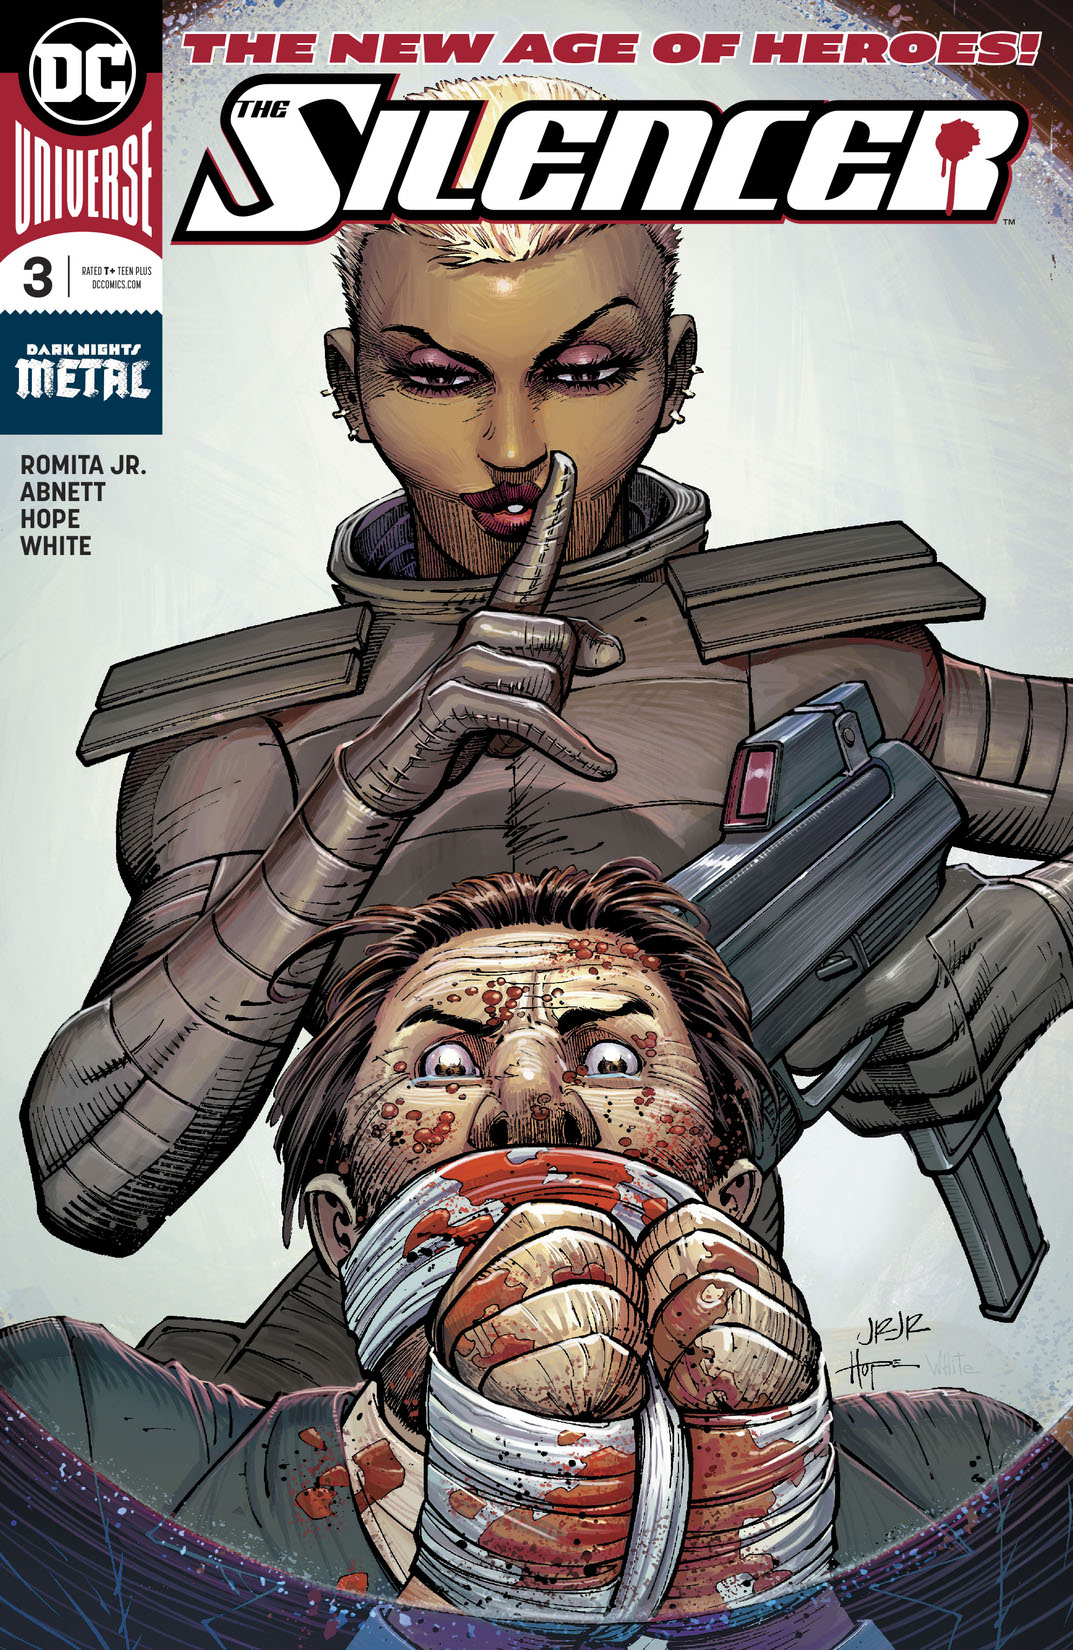 The Silencer #3 preview images